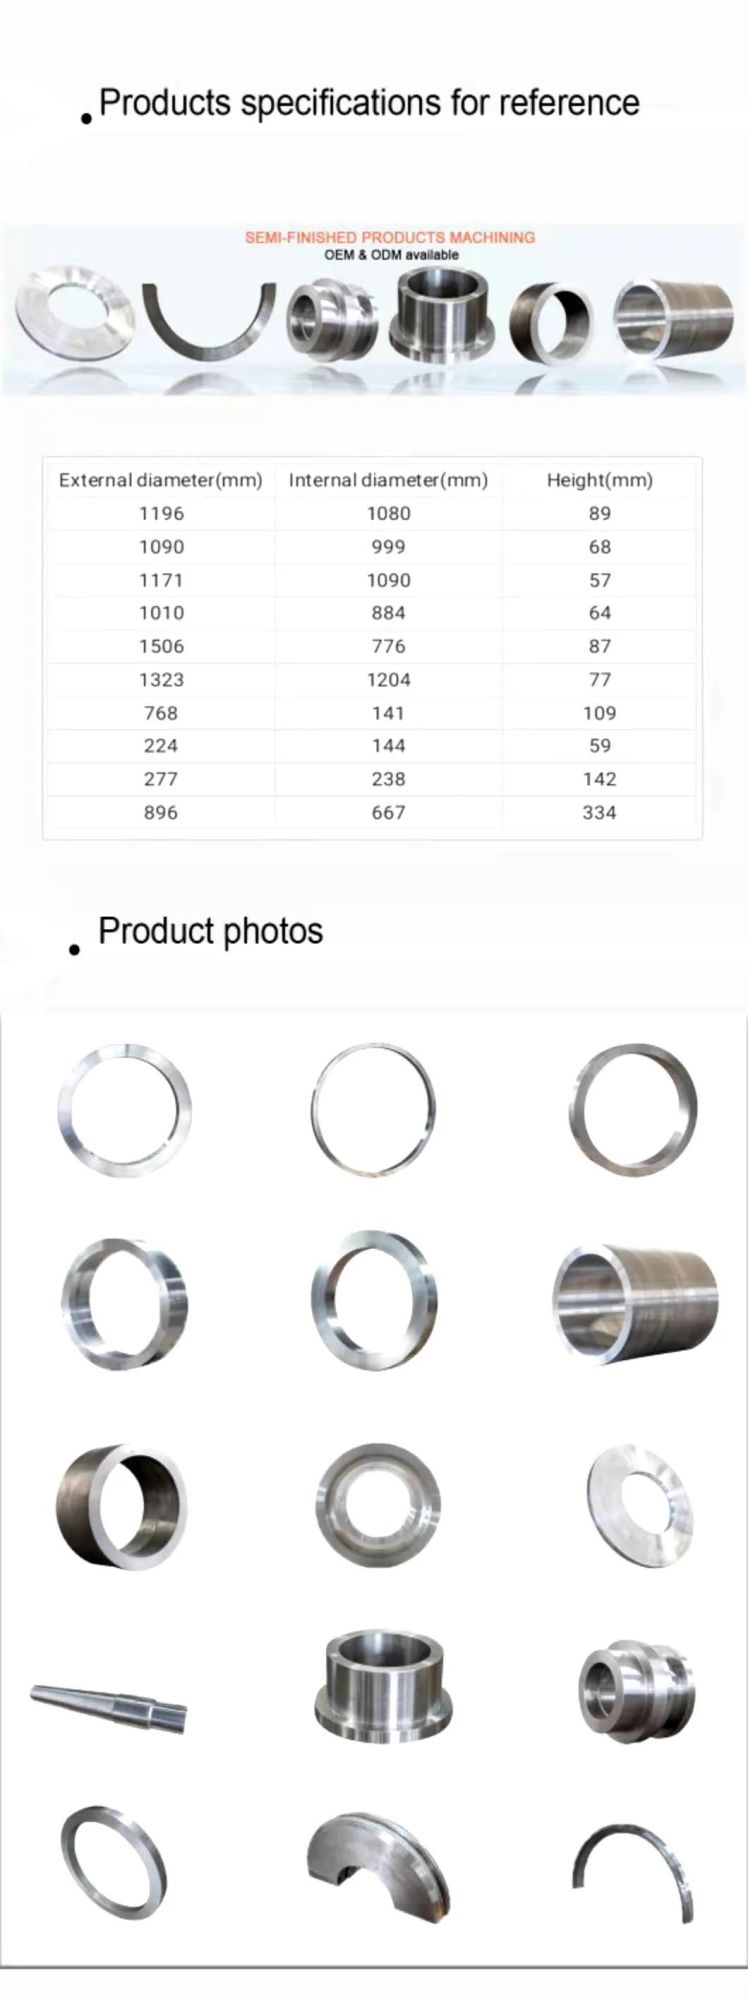 Petroleum /Feed/Chemical Industry Equipment Machinery Parts Processing Shaft